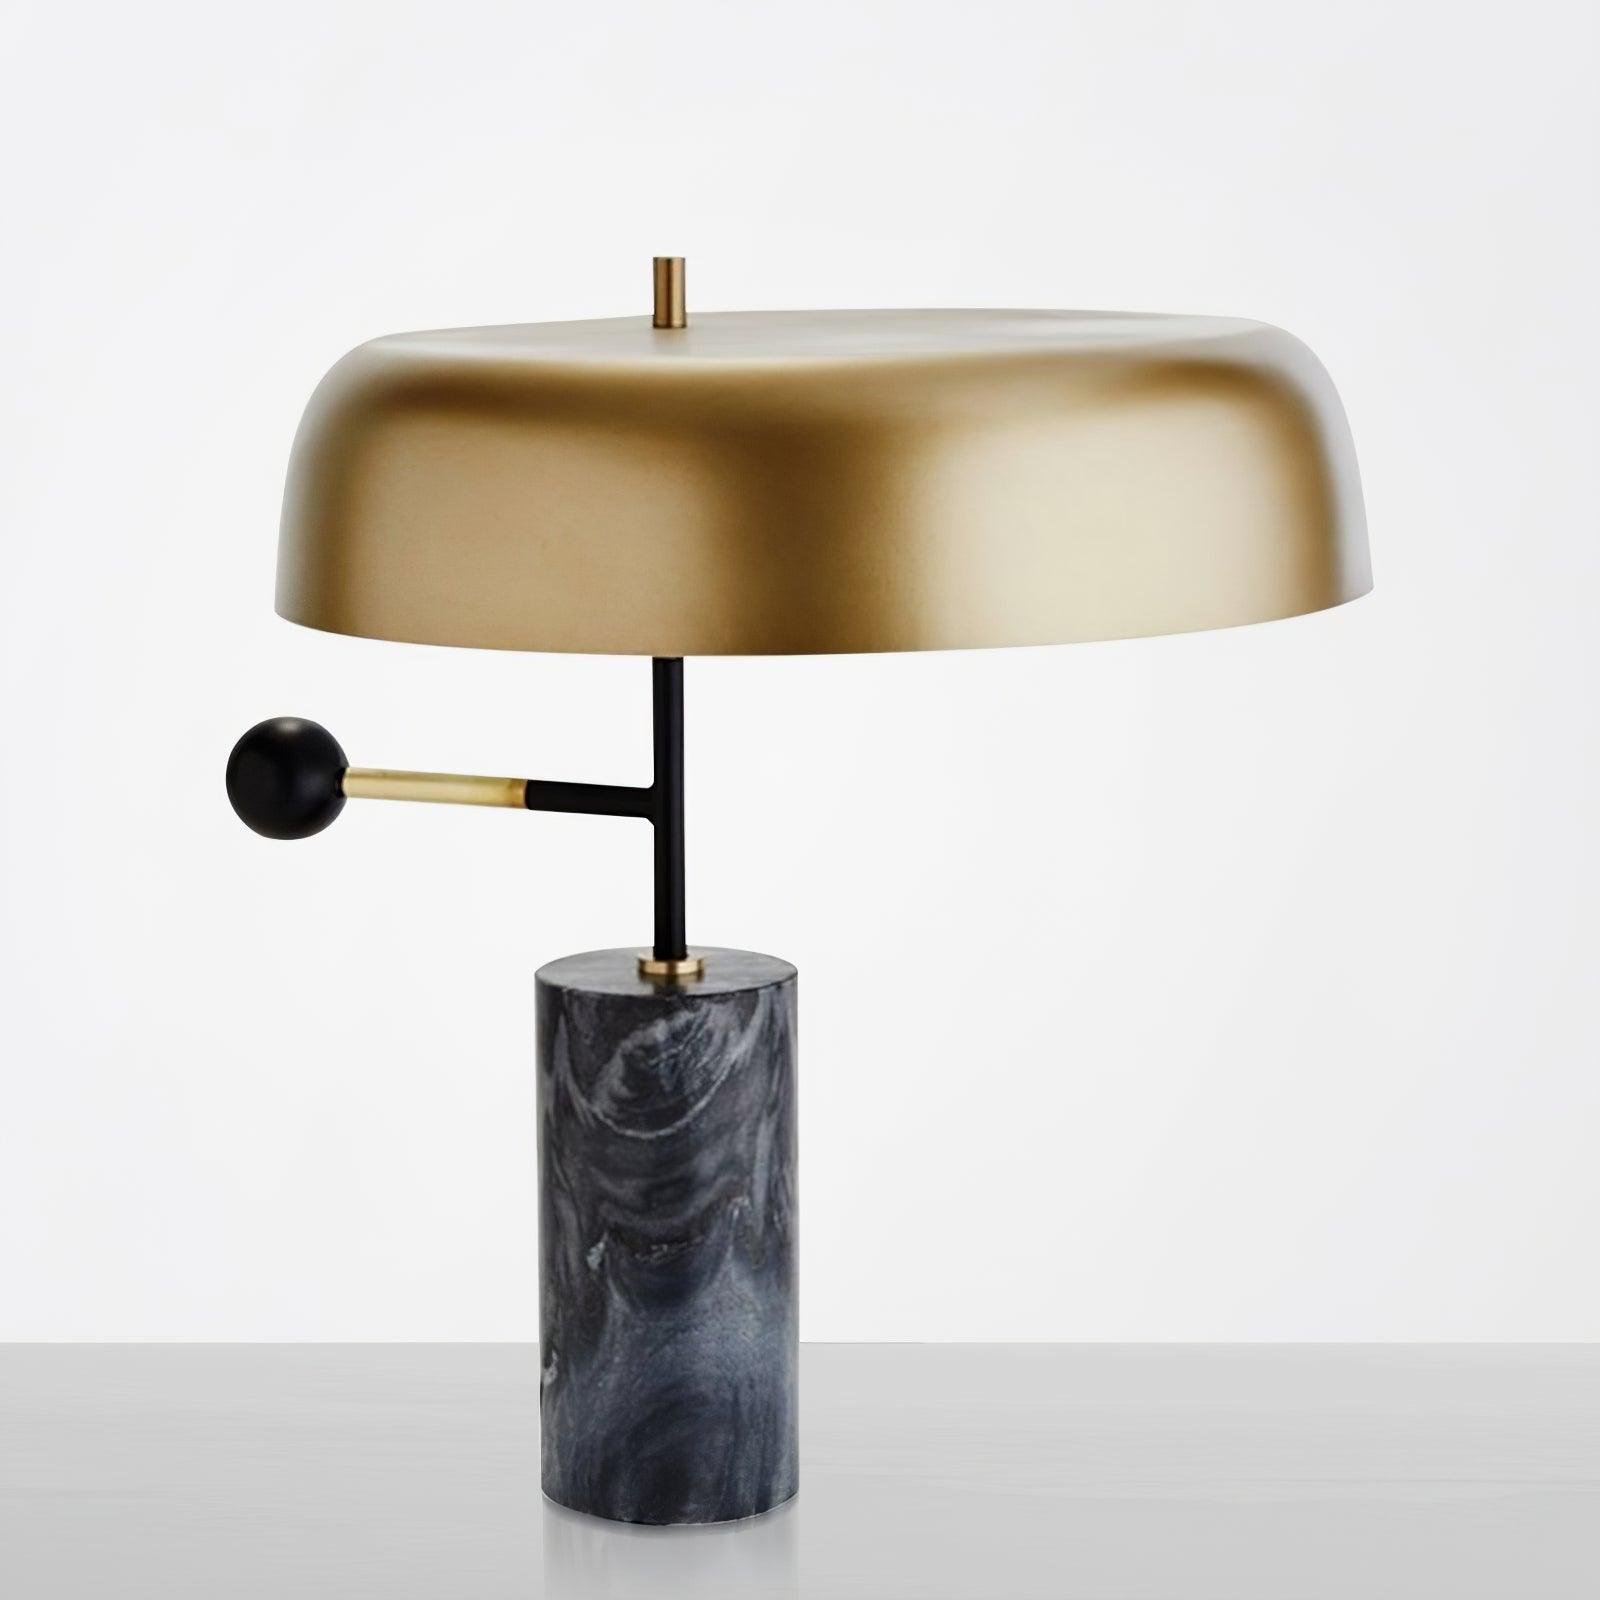 Black and Gold Adam Table Light with EU Plug - Diameter 13.8 inches x Height 17.7 inches (35cm x 45cm)